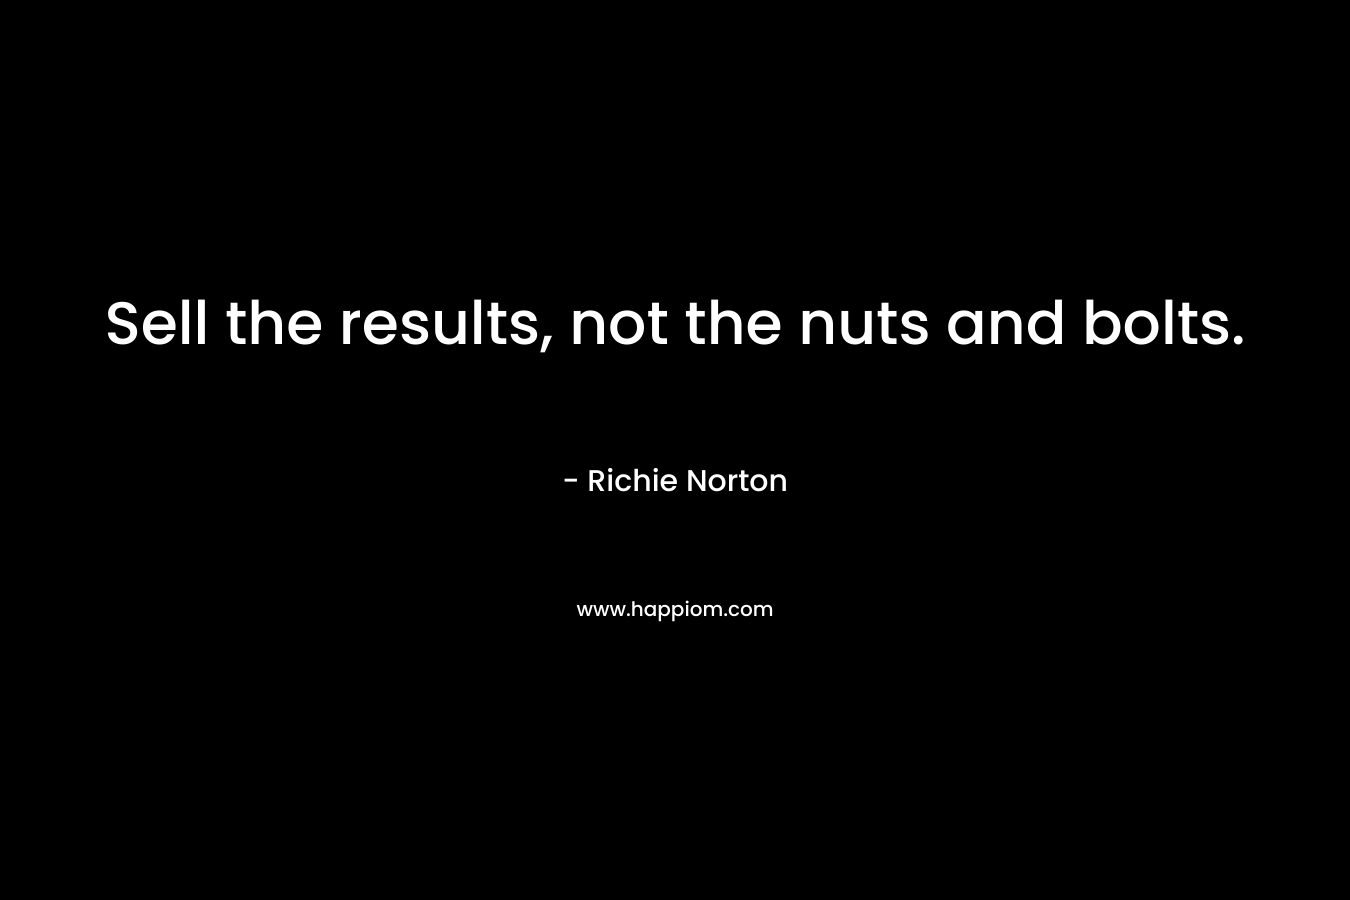 Sell the results, not the nuts and bolts. – Richie Norton